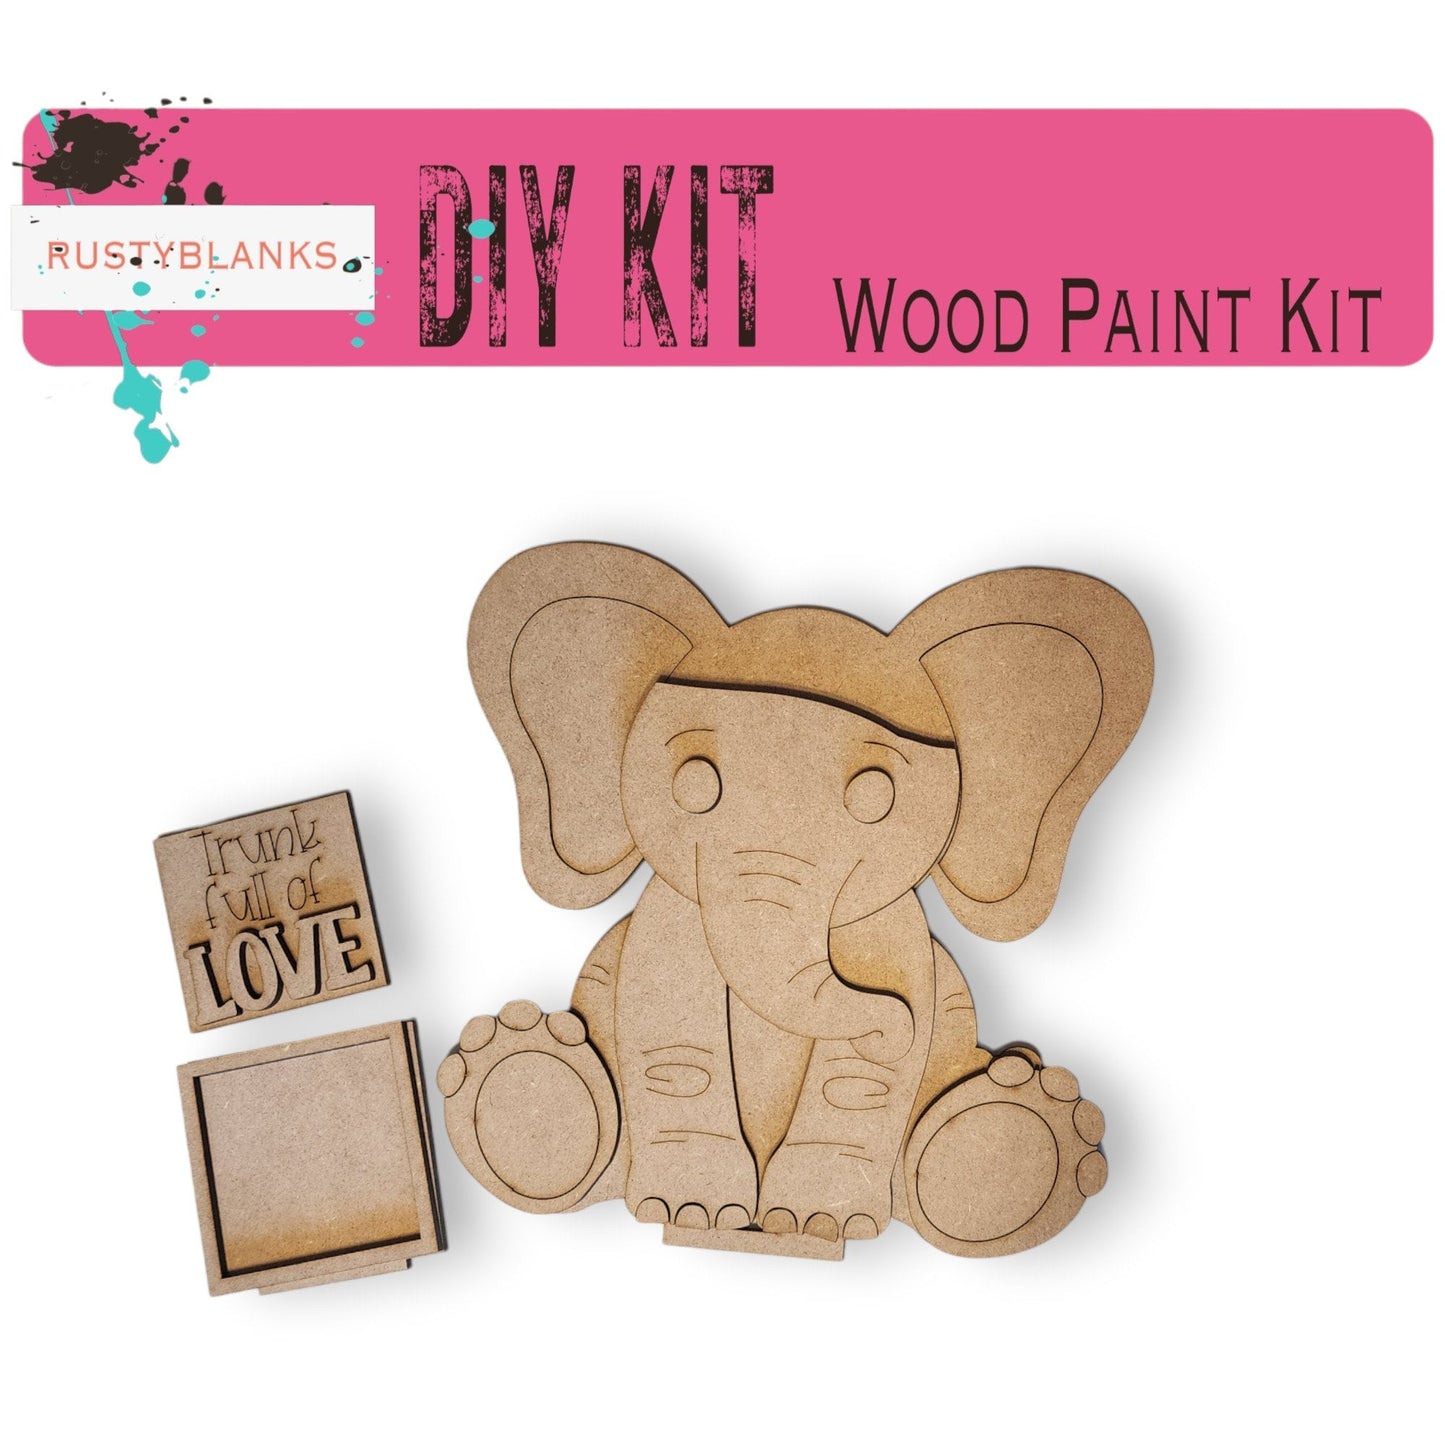 a wooden kit with a picture of an elephant